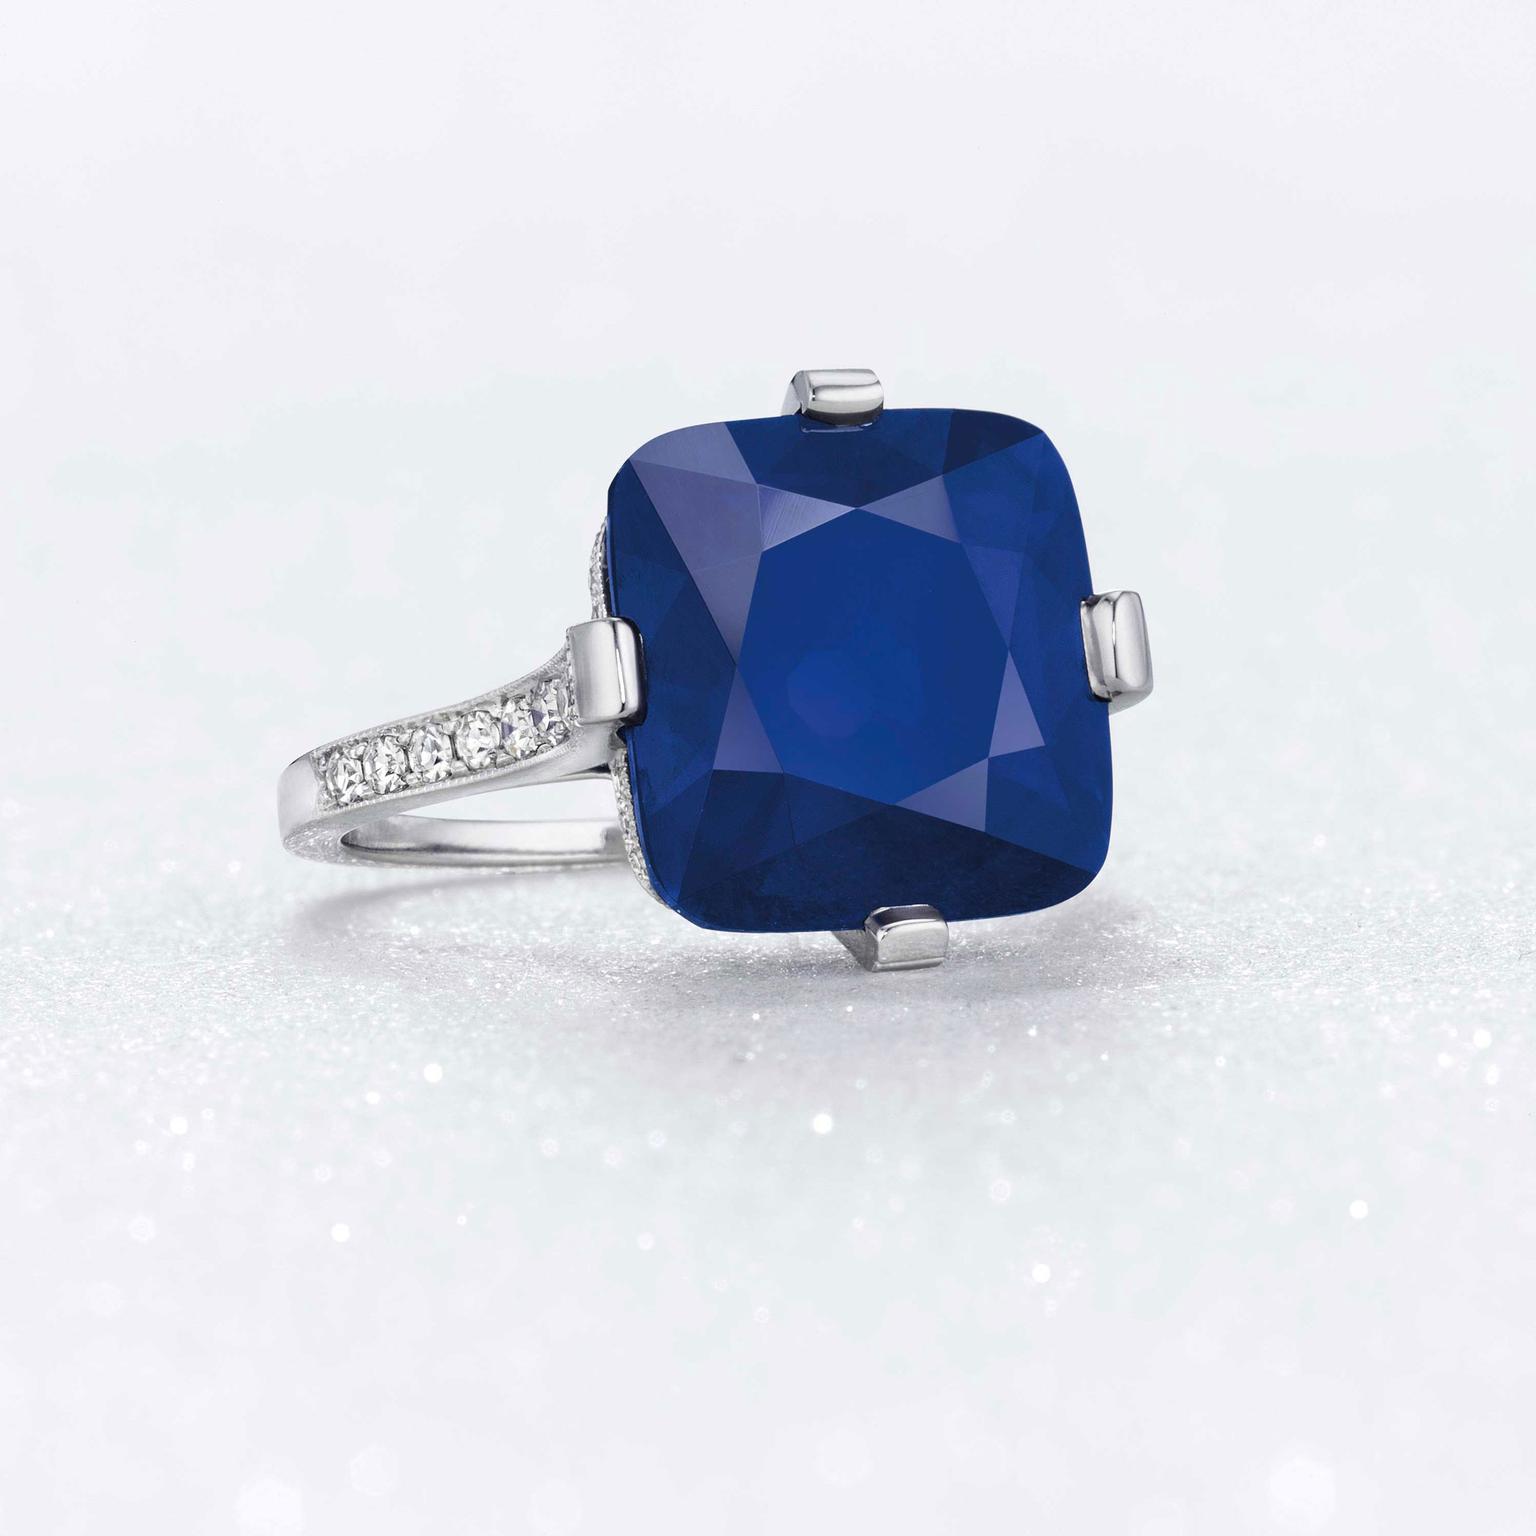 The Majestic Blue Sapphire ring